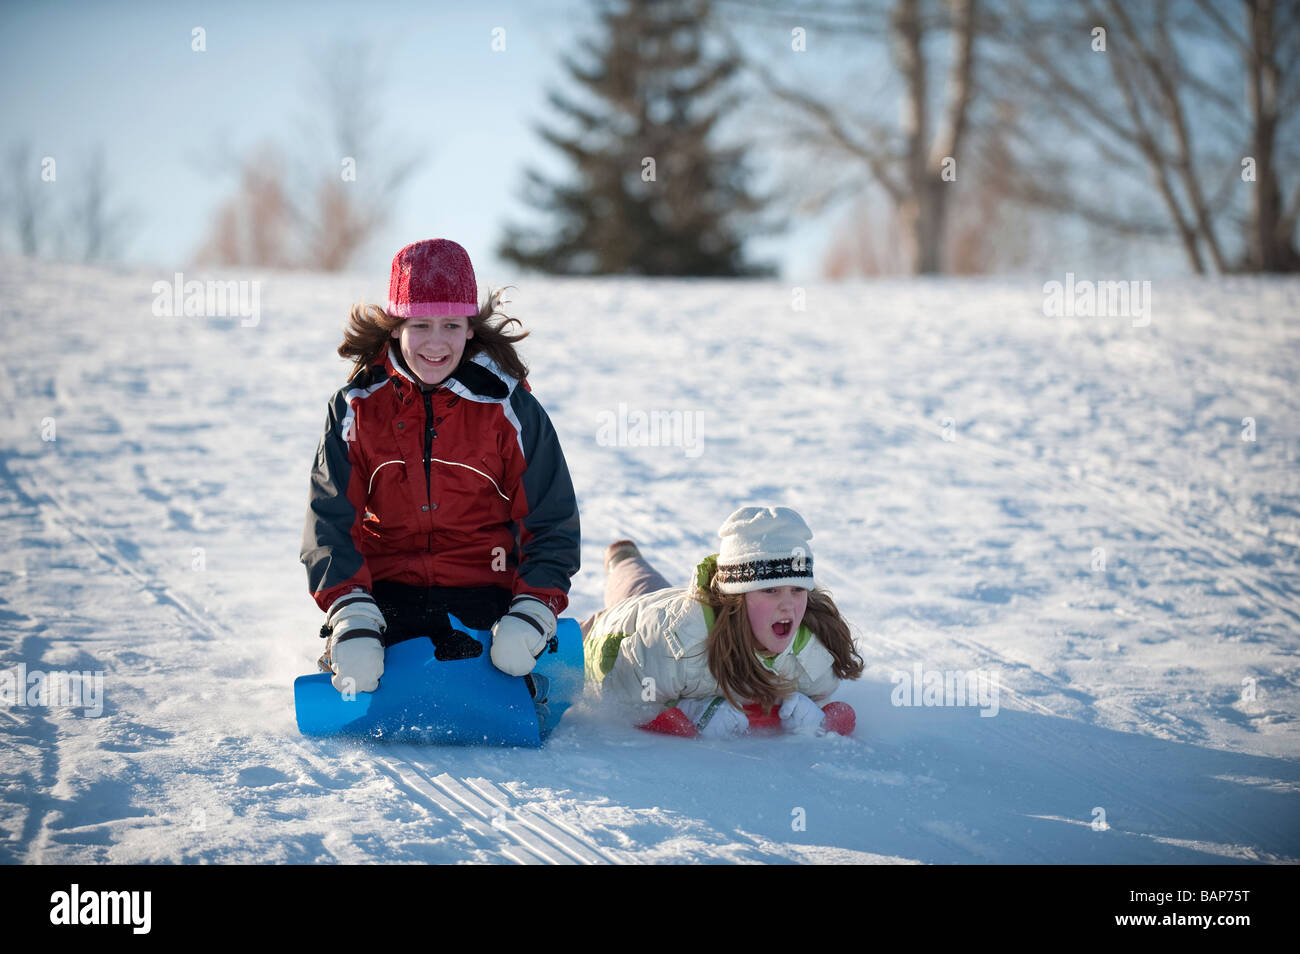 two girls going down tobogganing hill looking scared Stock Photo